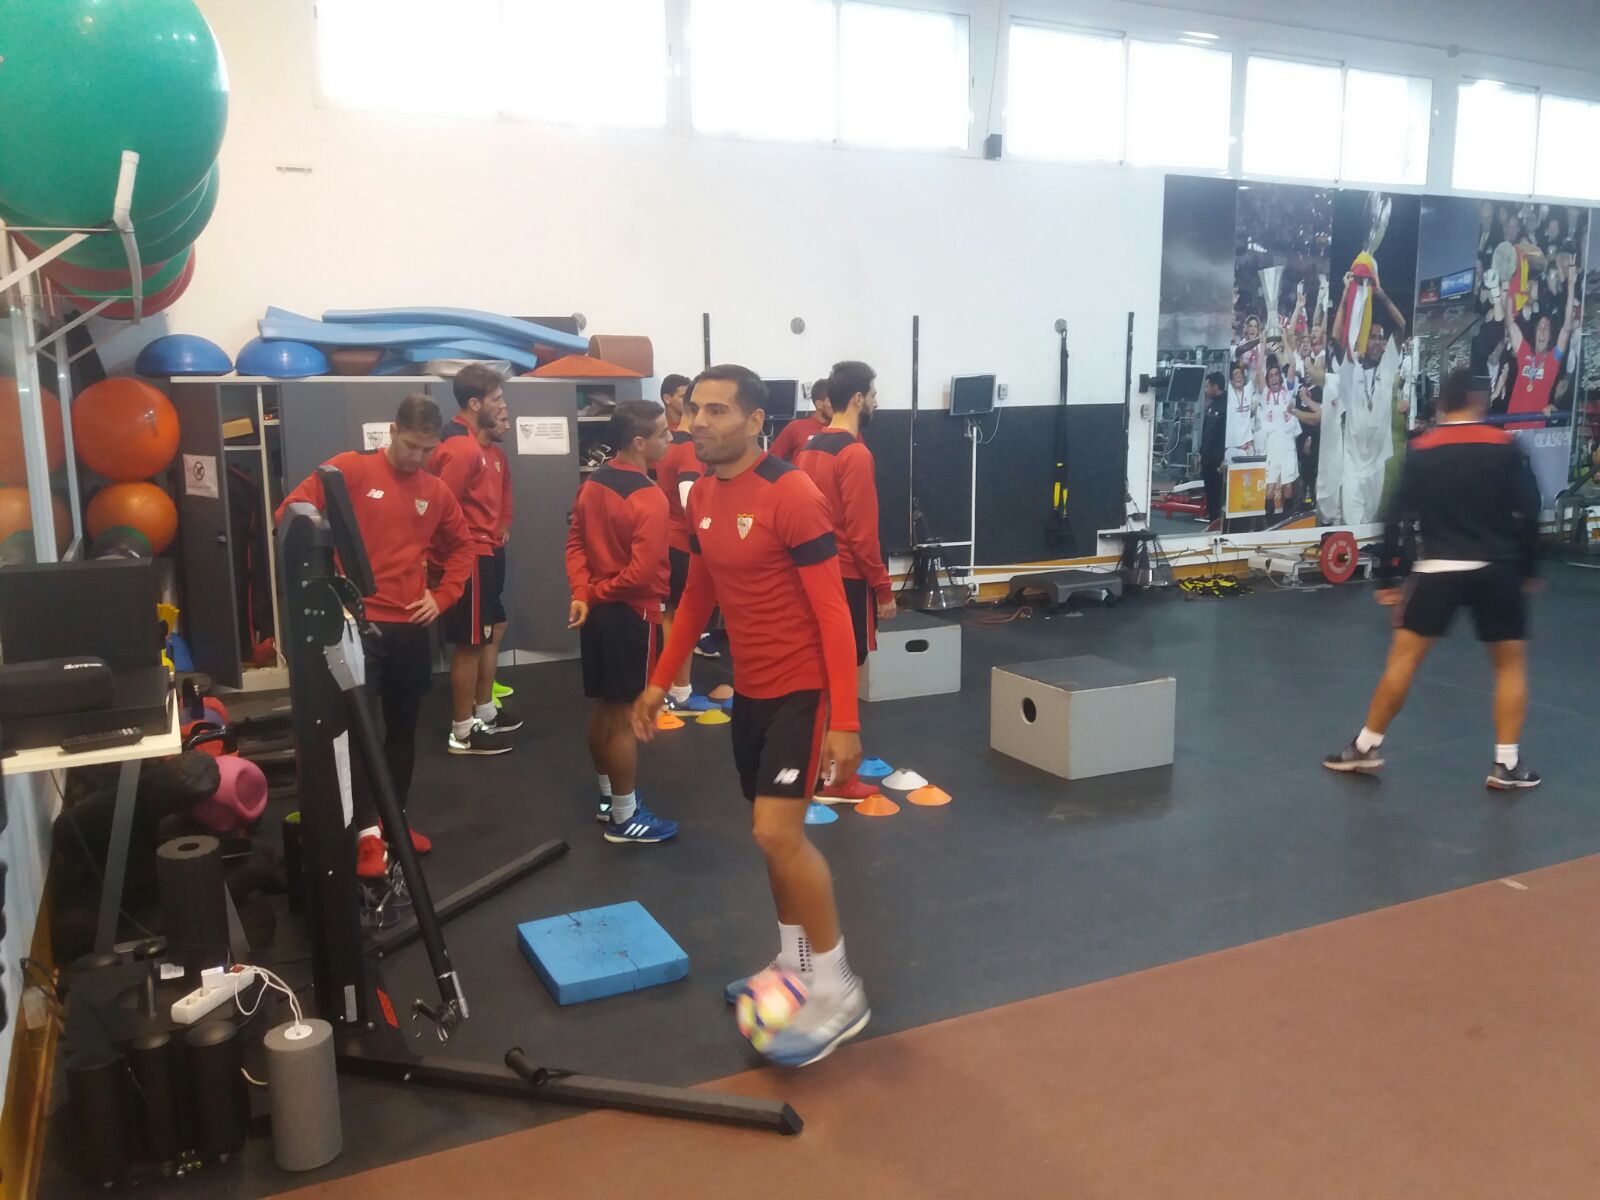 The players train in the gym